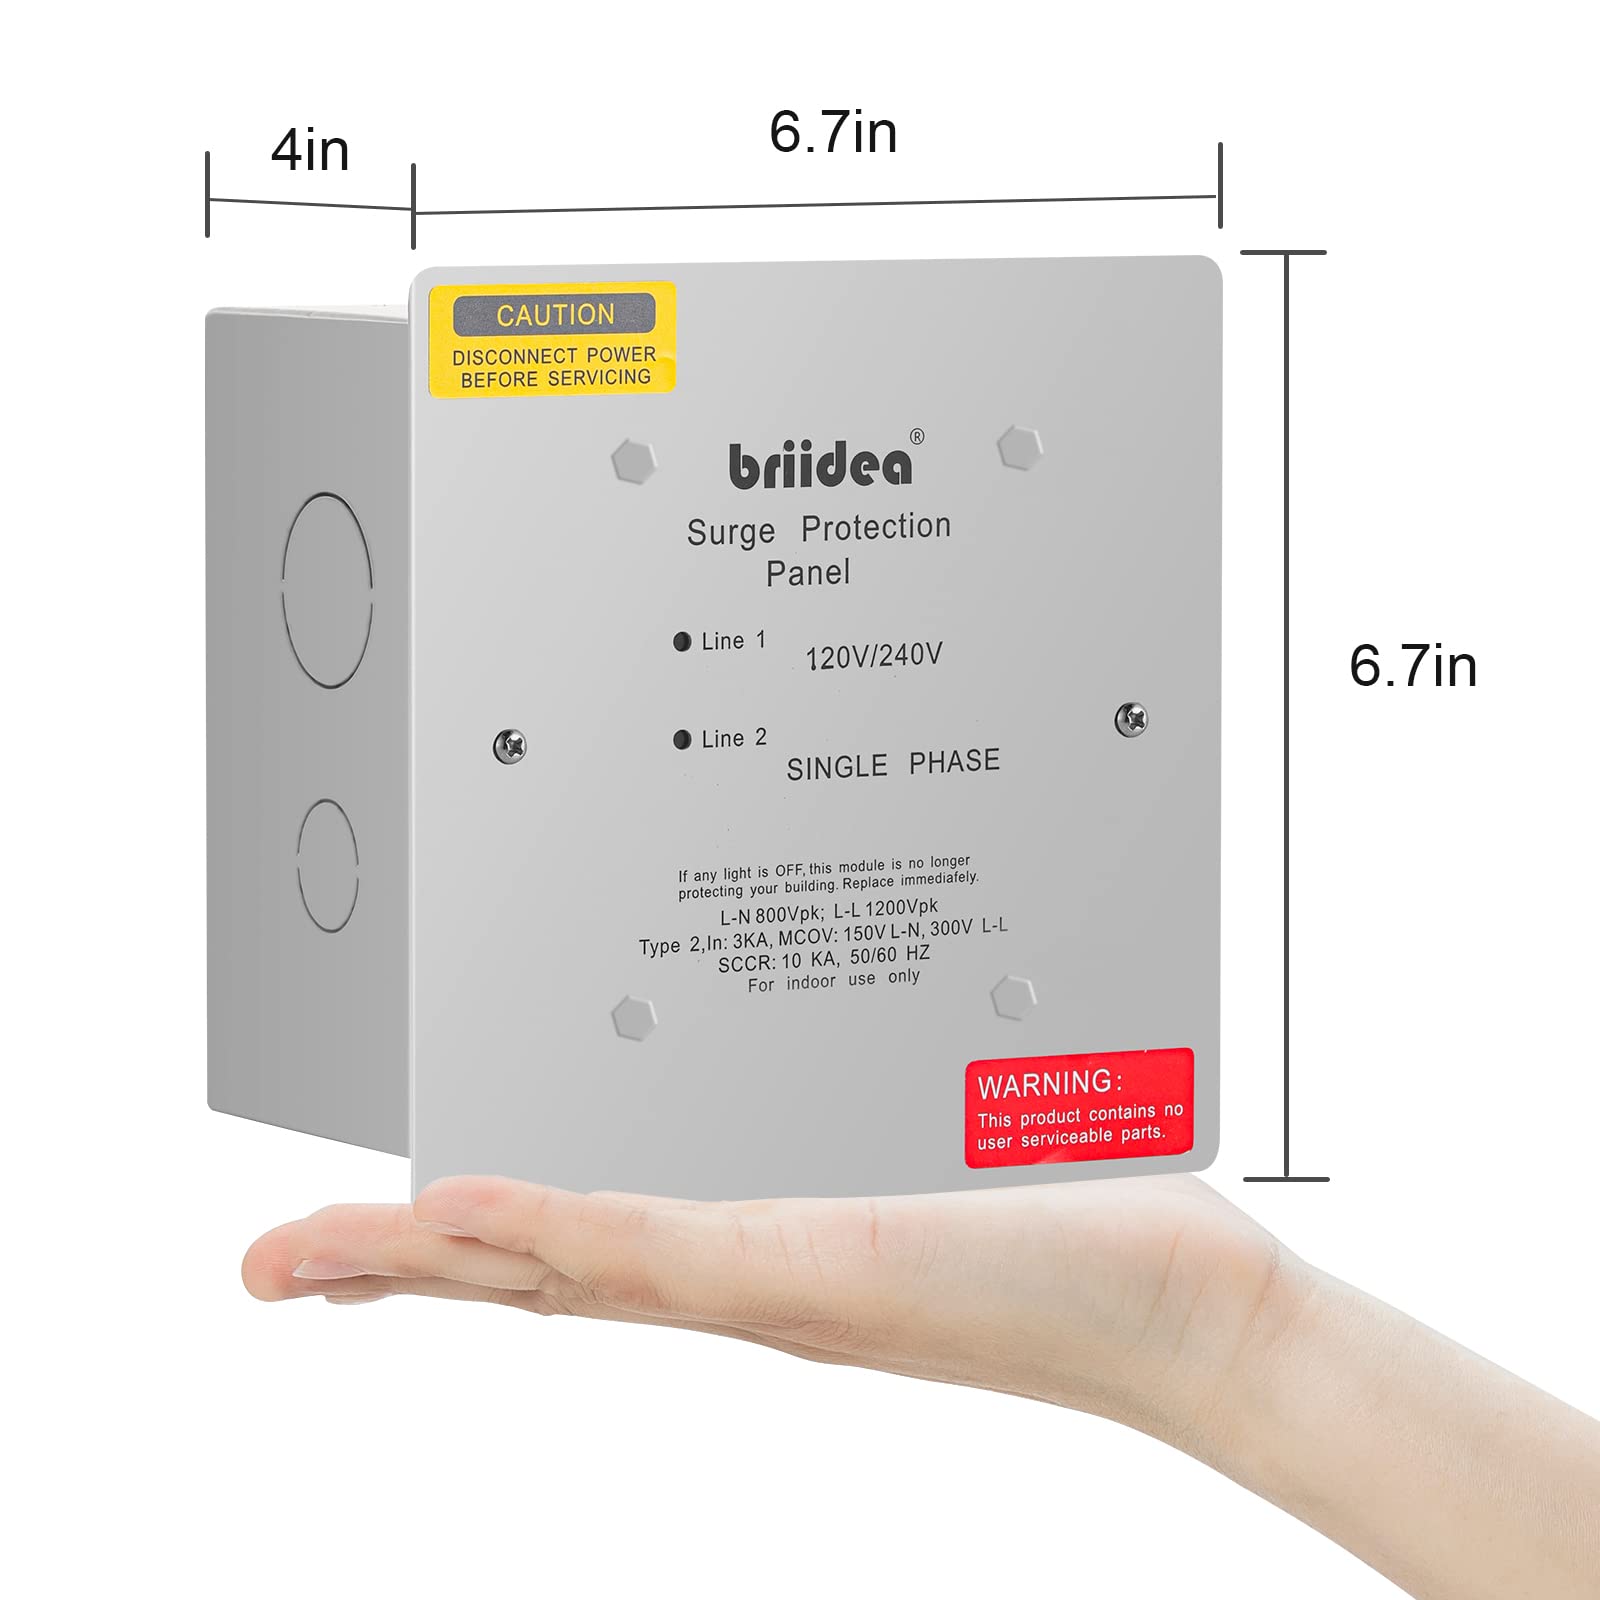 Whole House Surge Protector, Briidea Type 2 Single Phase 120/240 Volt Panel Whole House Surge Protection, Light Commercial/Residential Grade, in NEMA 1 Enclosure